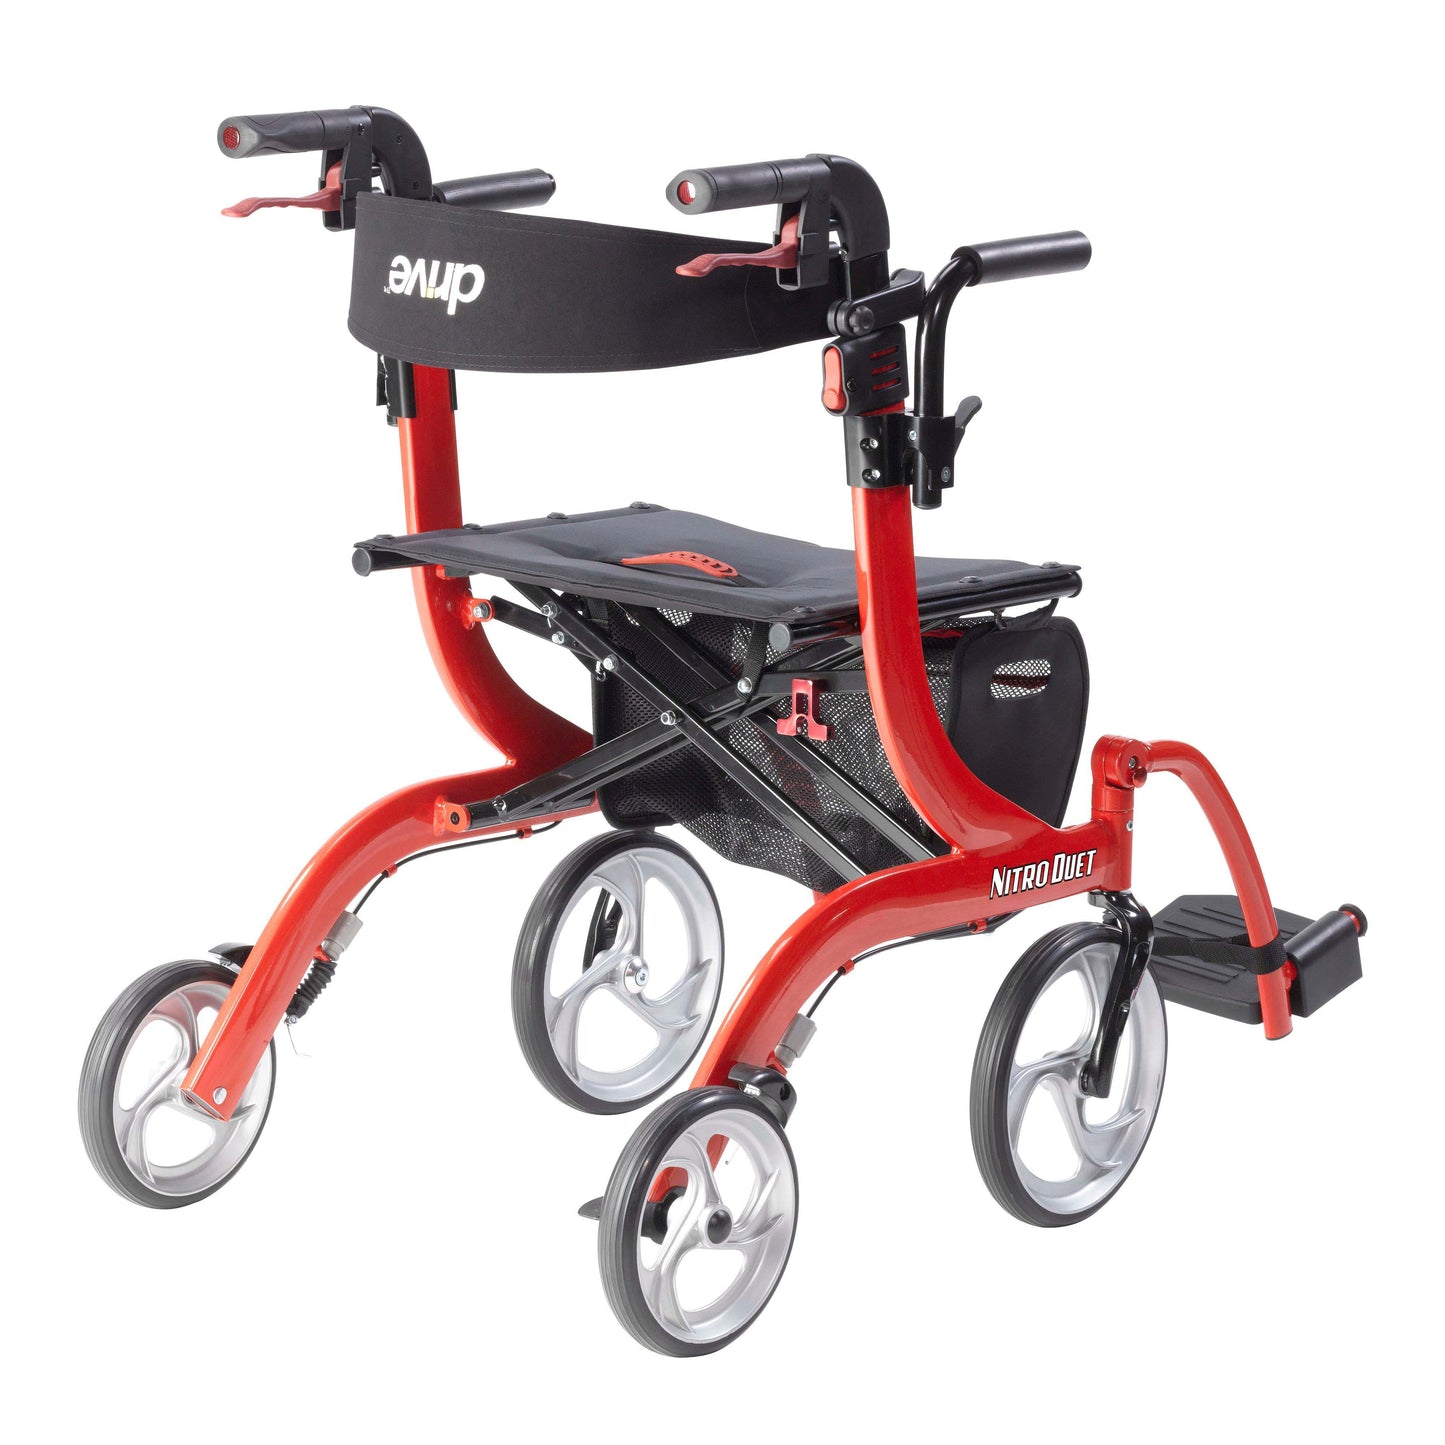 Drive Medical Nitro Duet Dual Function Transport Wheelchair and Rollator Rolling Walker, Red rtl10266dt